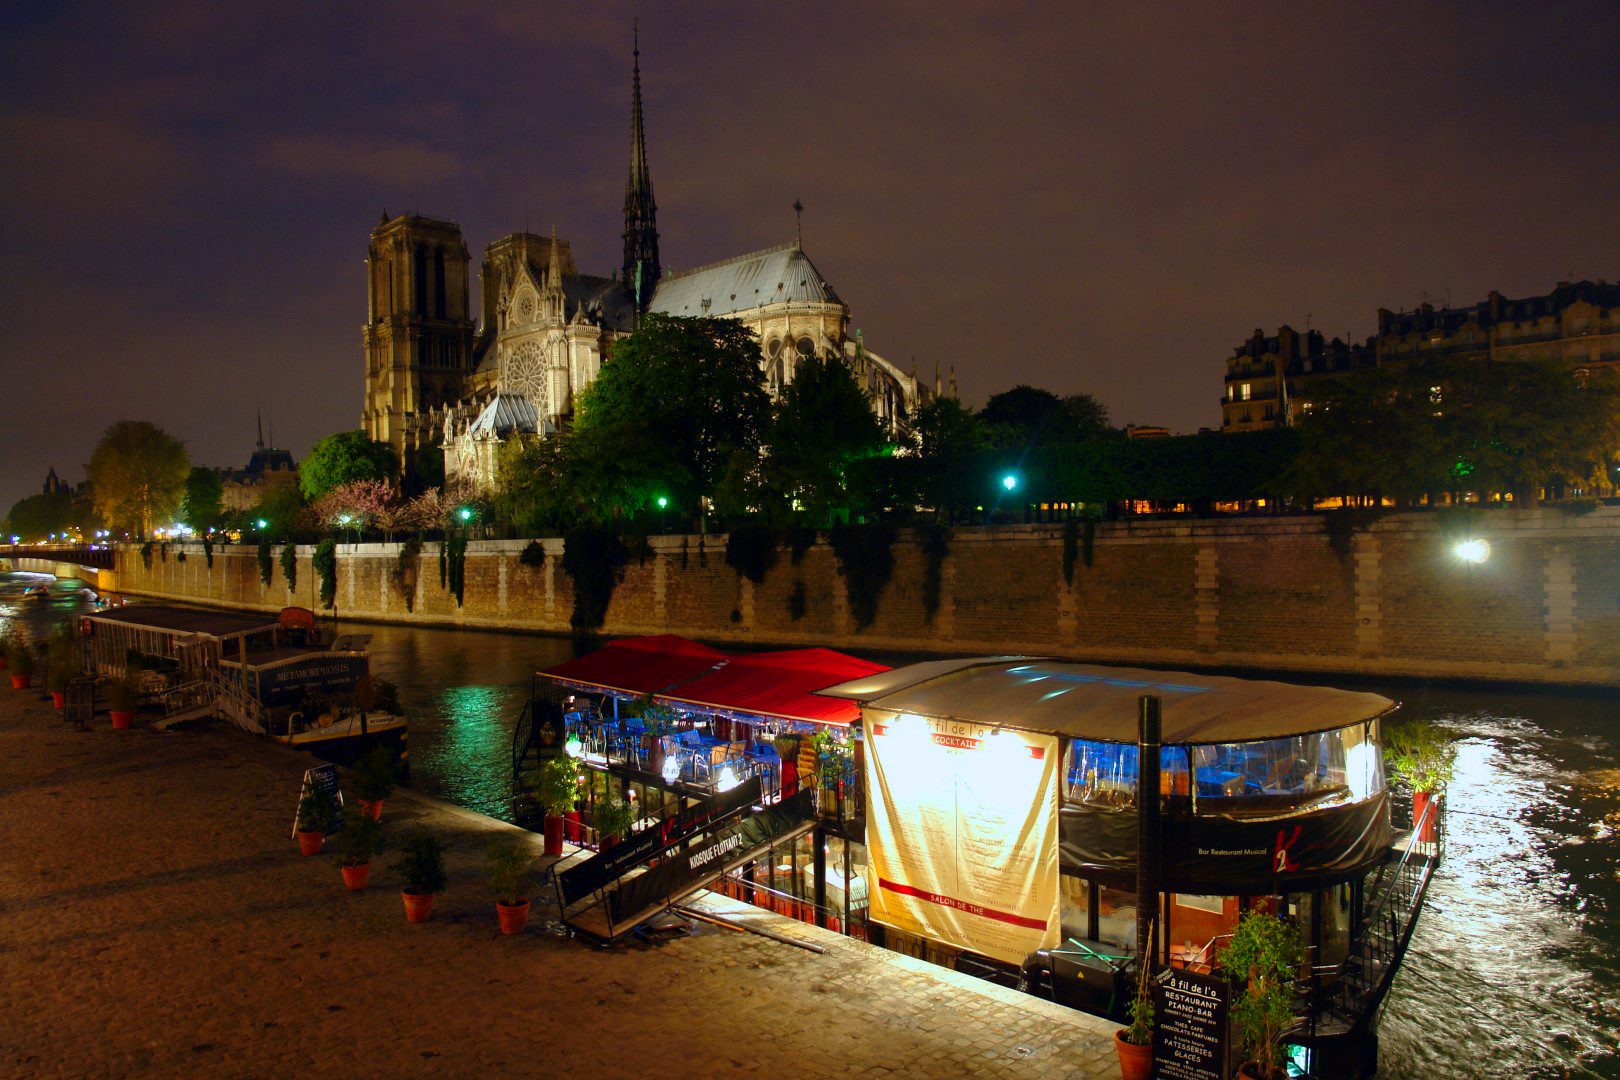 What to see in Paris in a weekend